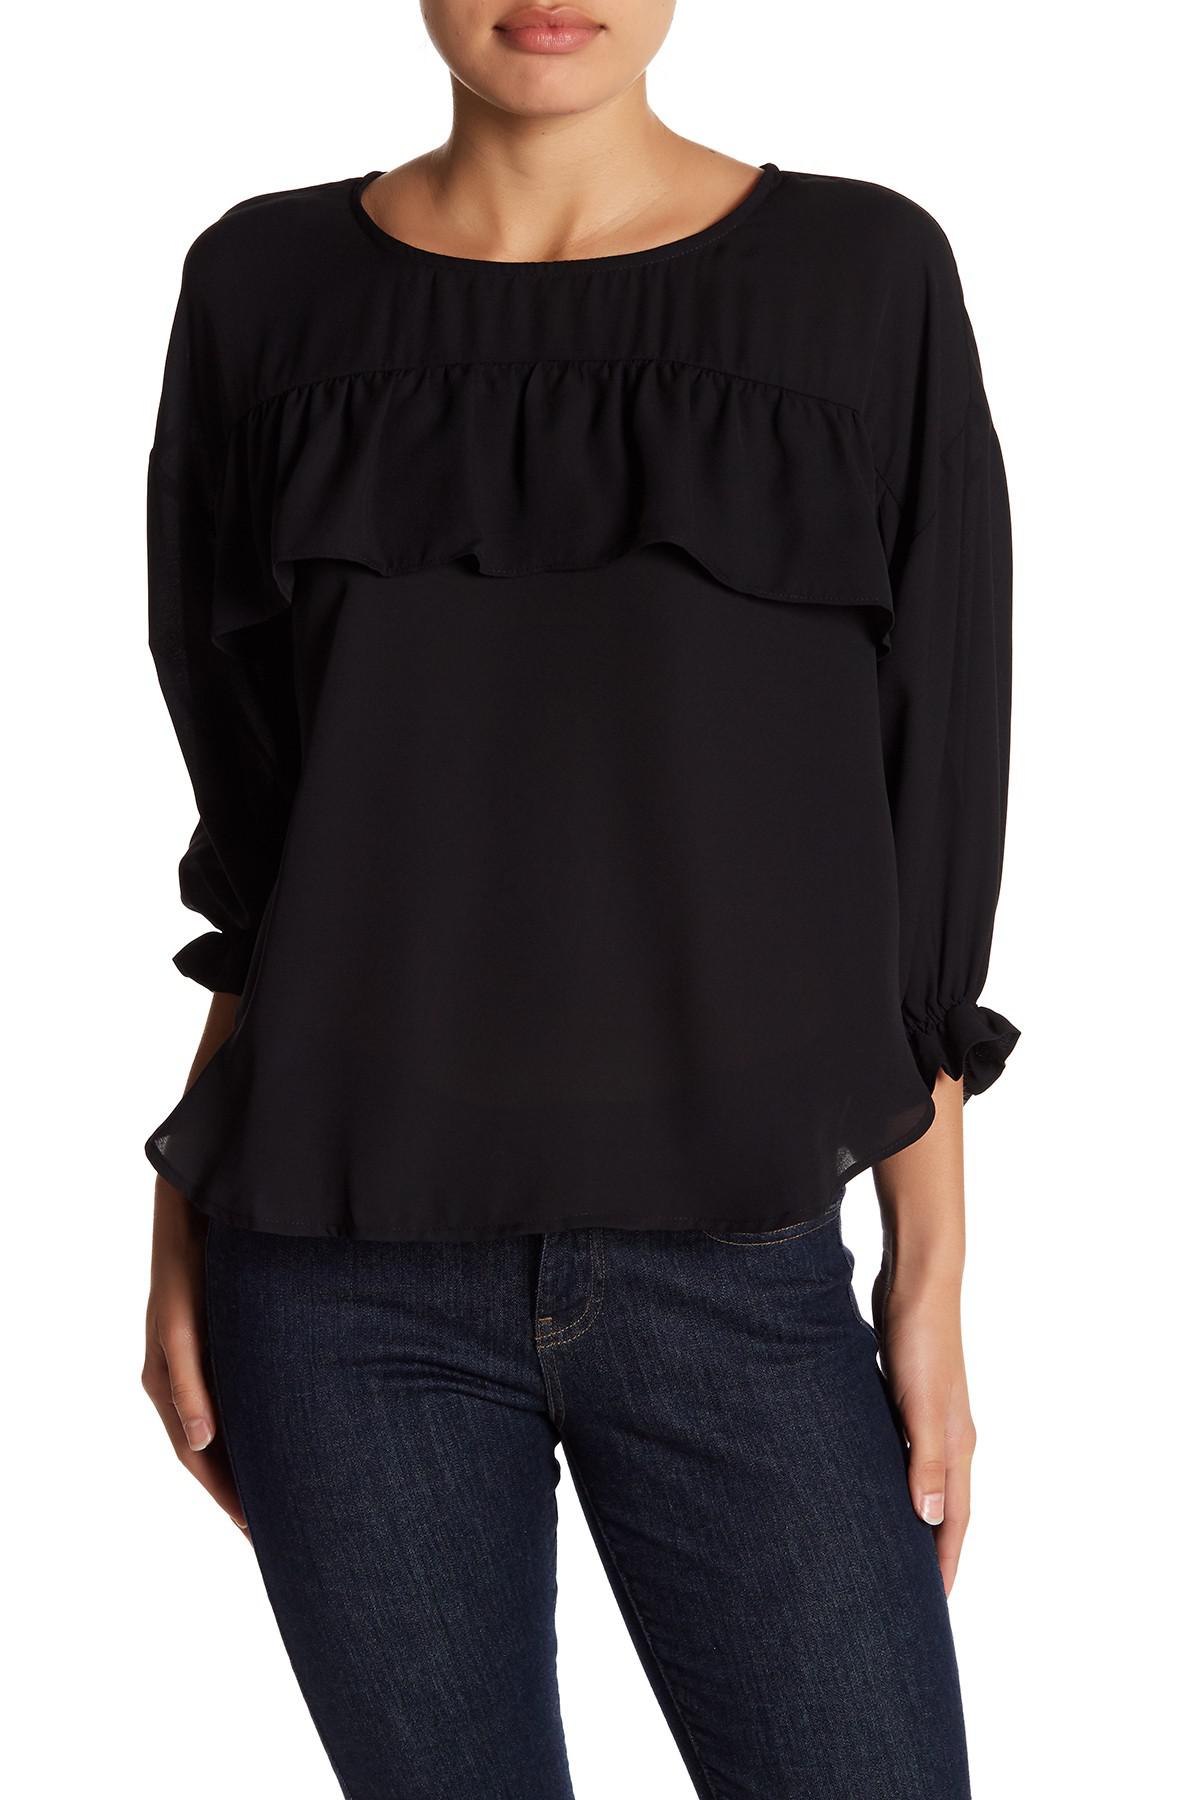 Lyst - Halogen Ruffle Popover Crepe Blouse (petite Size Available) in Black